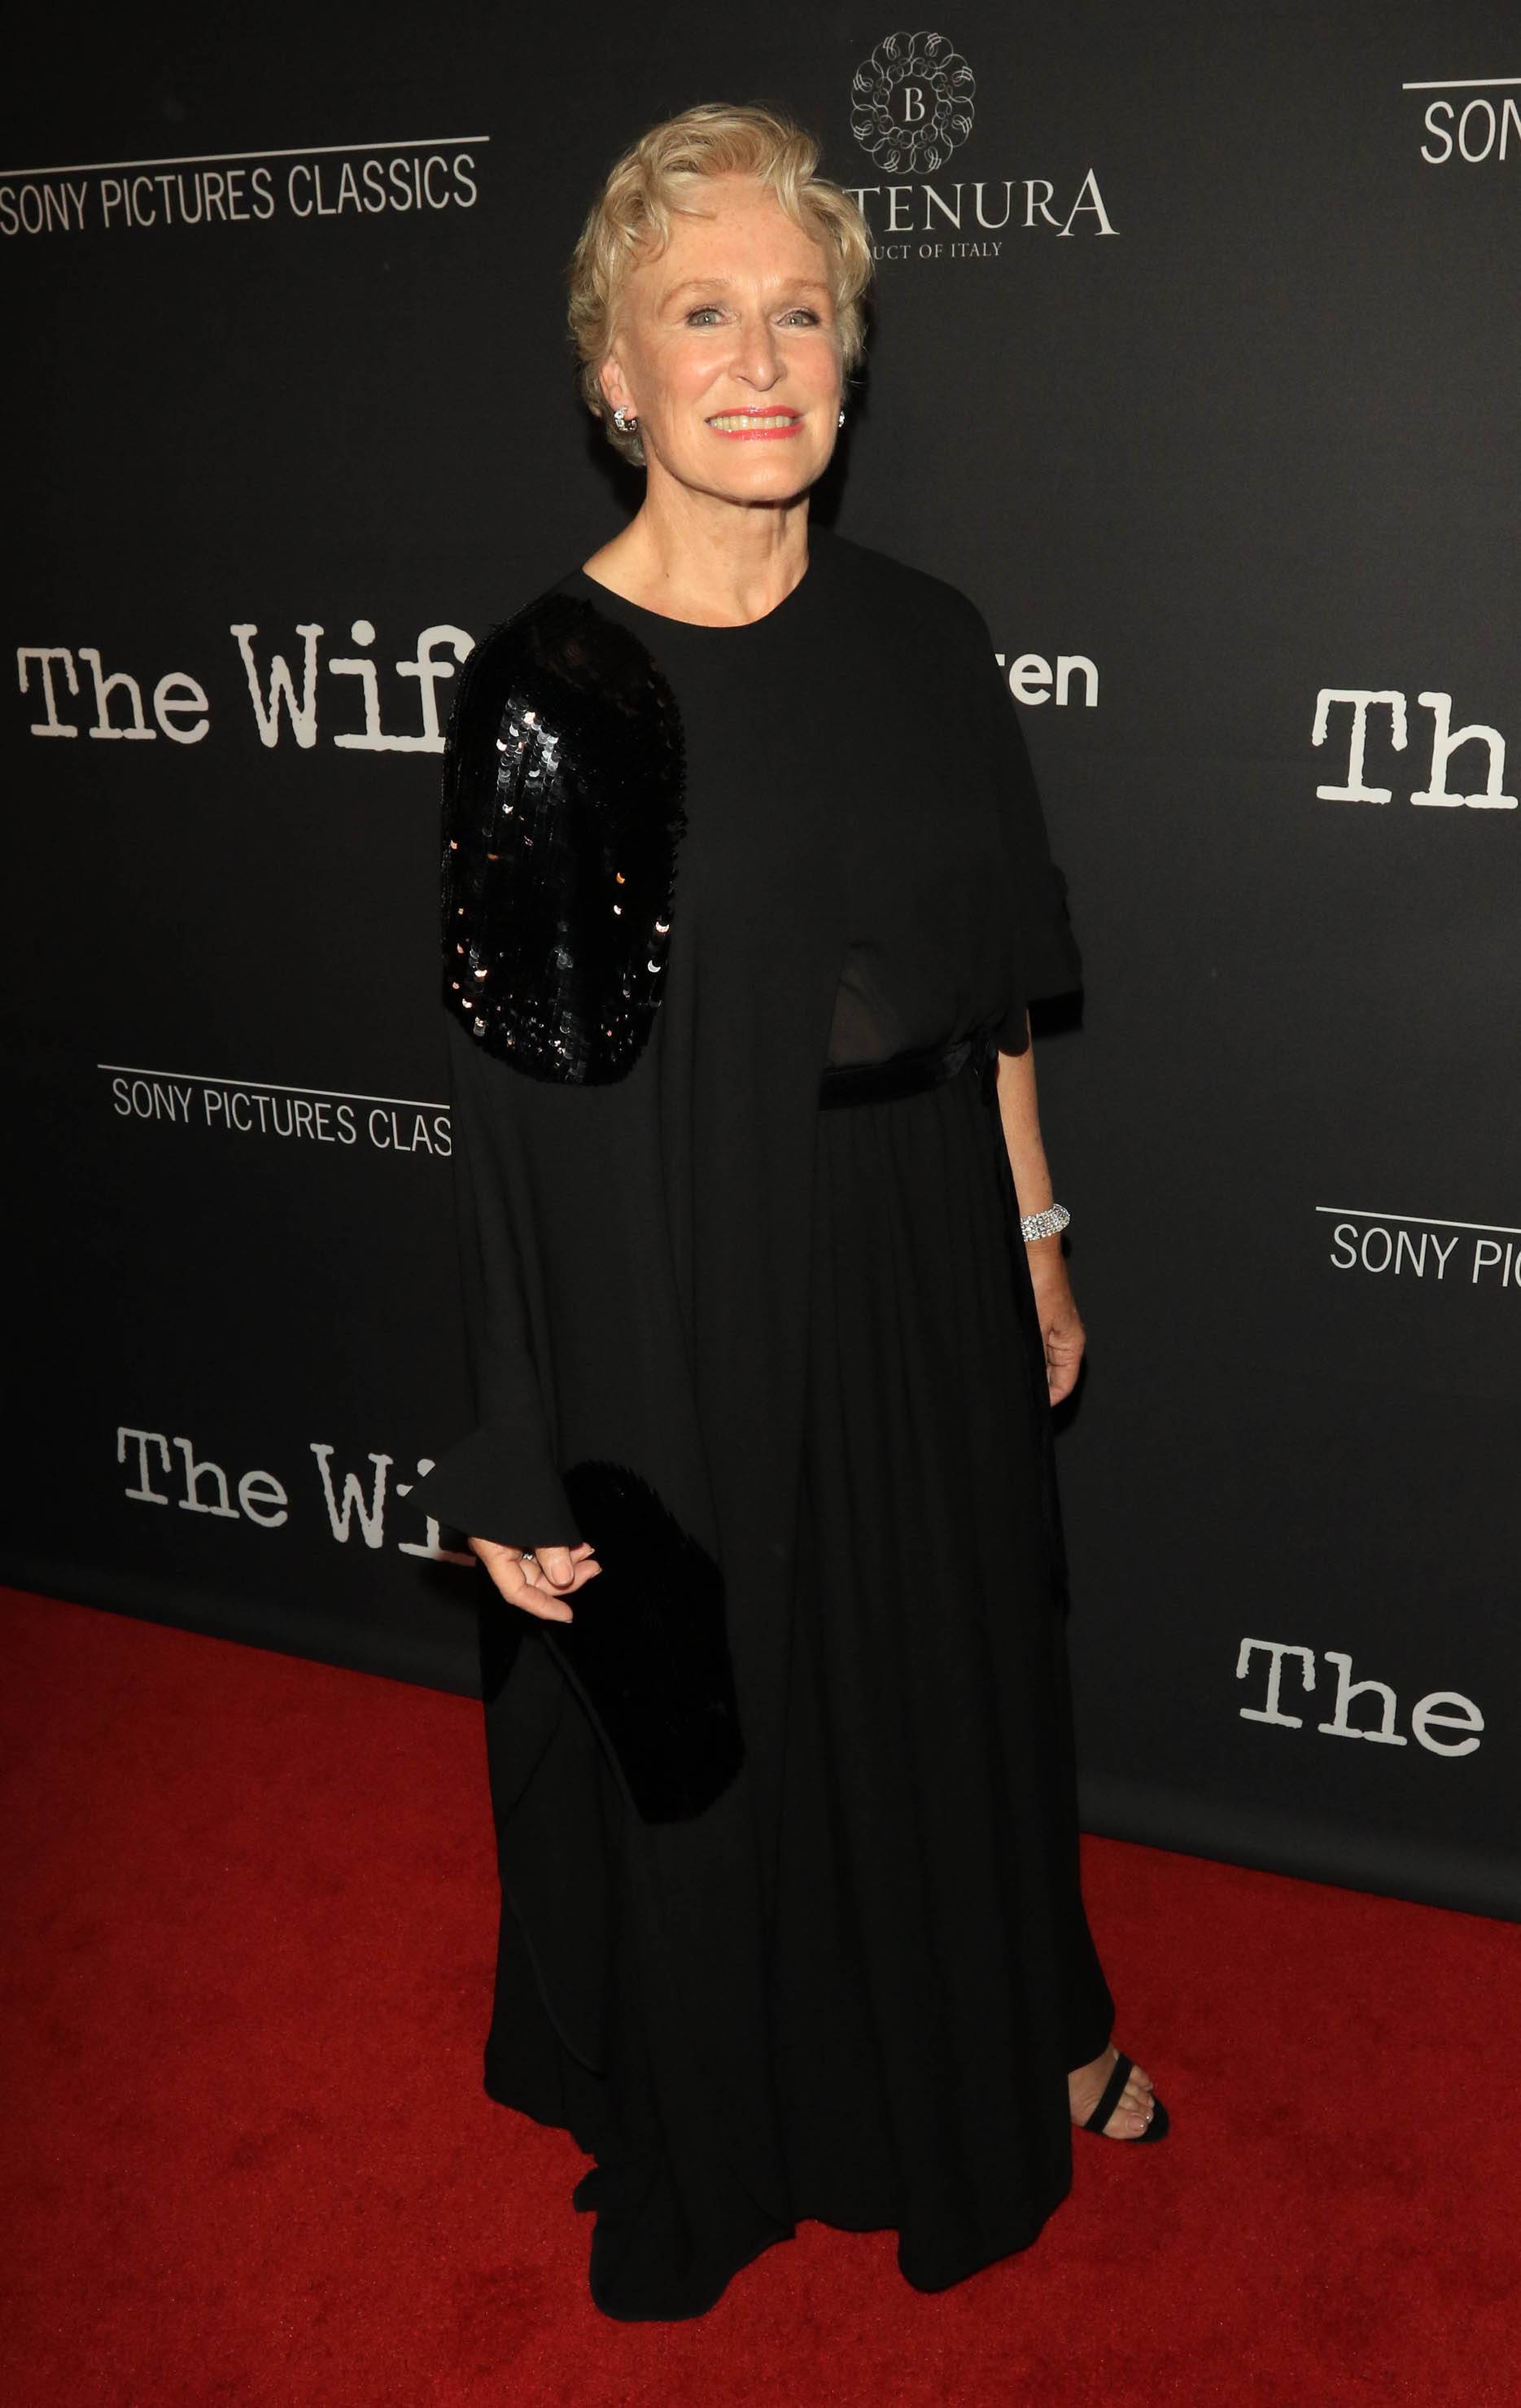 The Wife Premiere - Los Angeles